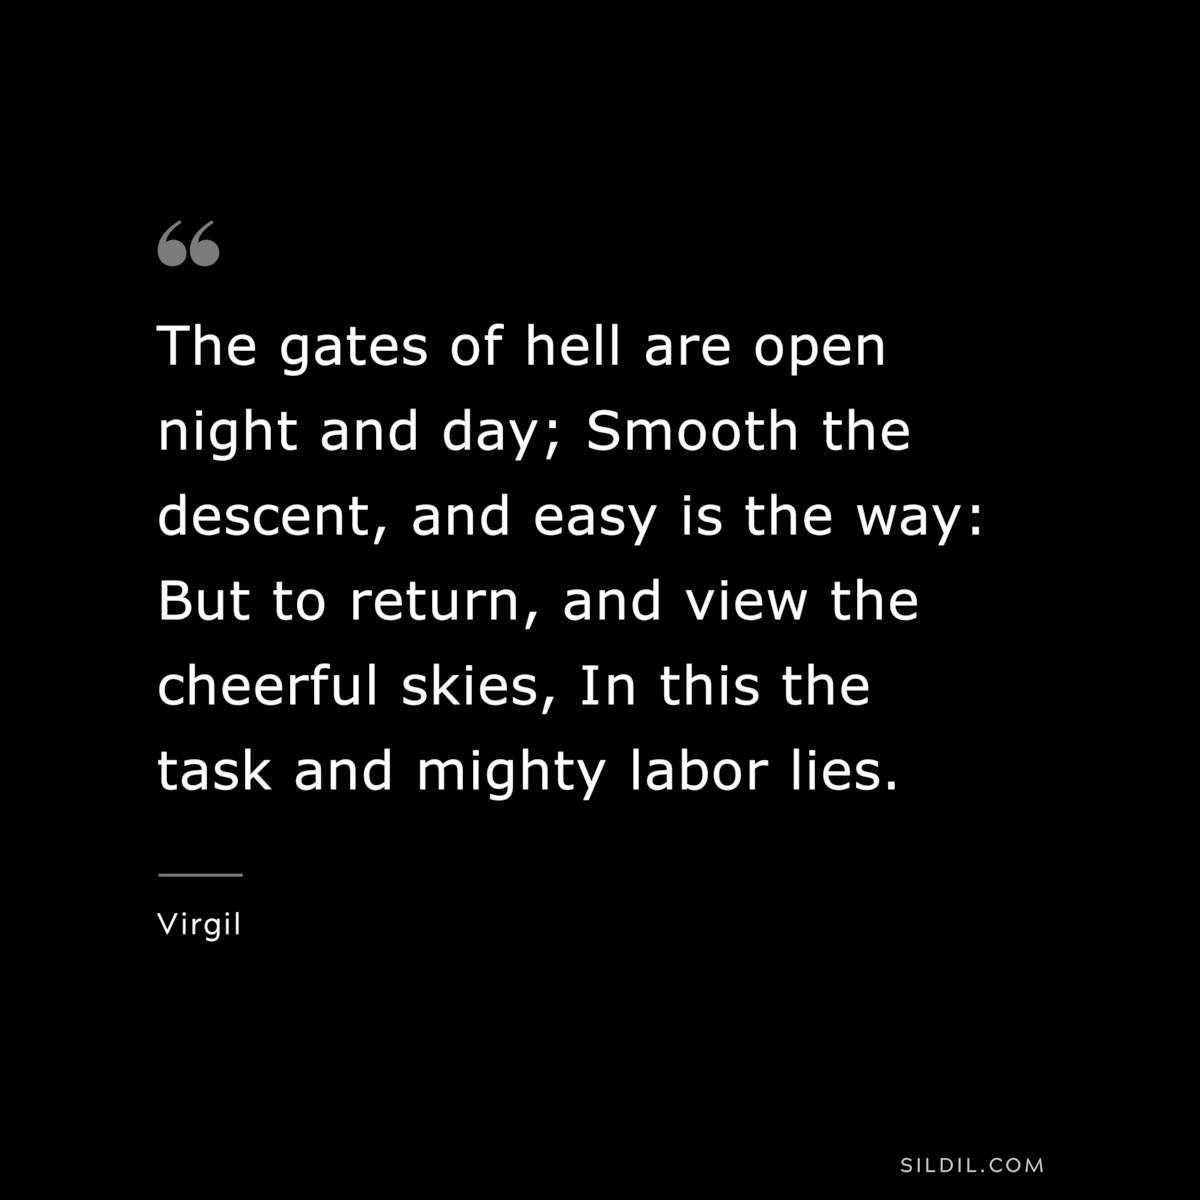 The gates of hell are open night and day; Smooth the descent, and easy is the way: But to return, and view the cheerful skies, In this the task and mighty labor lies. ― Virgil